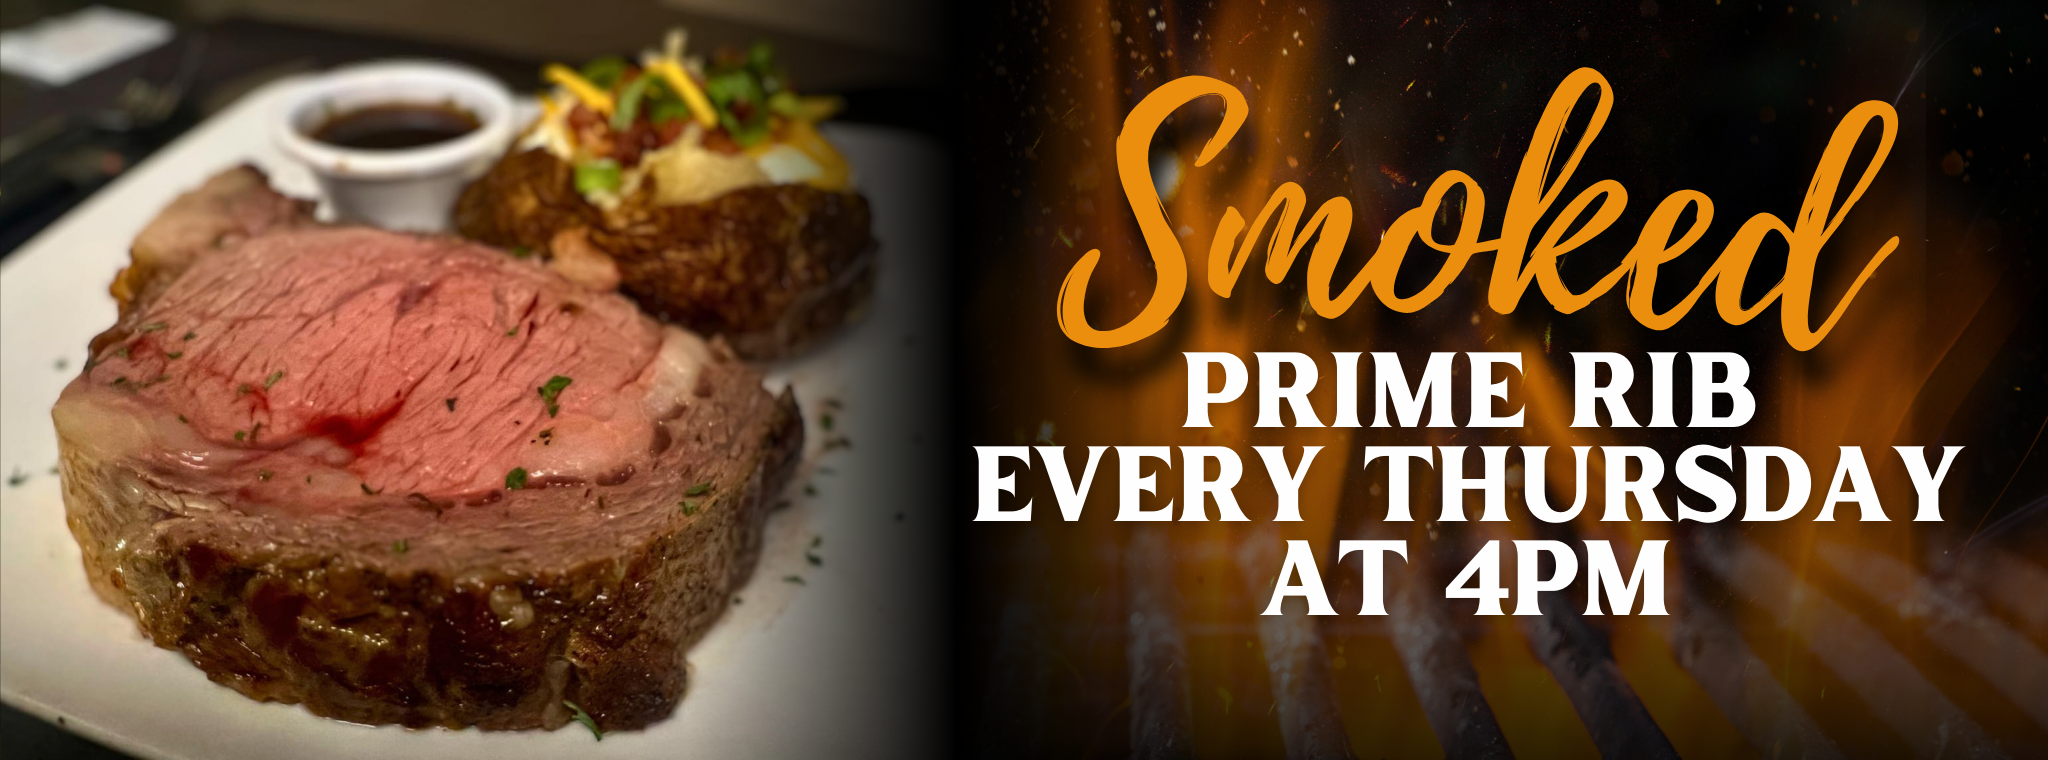 Smoked Prime Rib platted with fully loaded baked potato, available at all Ovation Bistro  Bar locations on Thursdays starting at 4pm